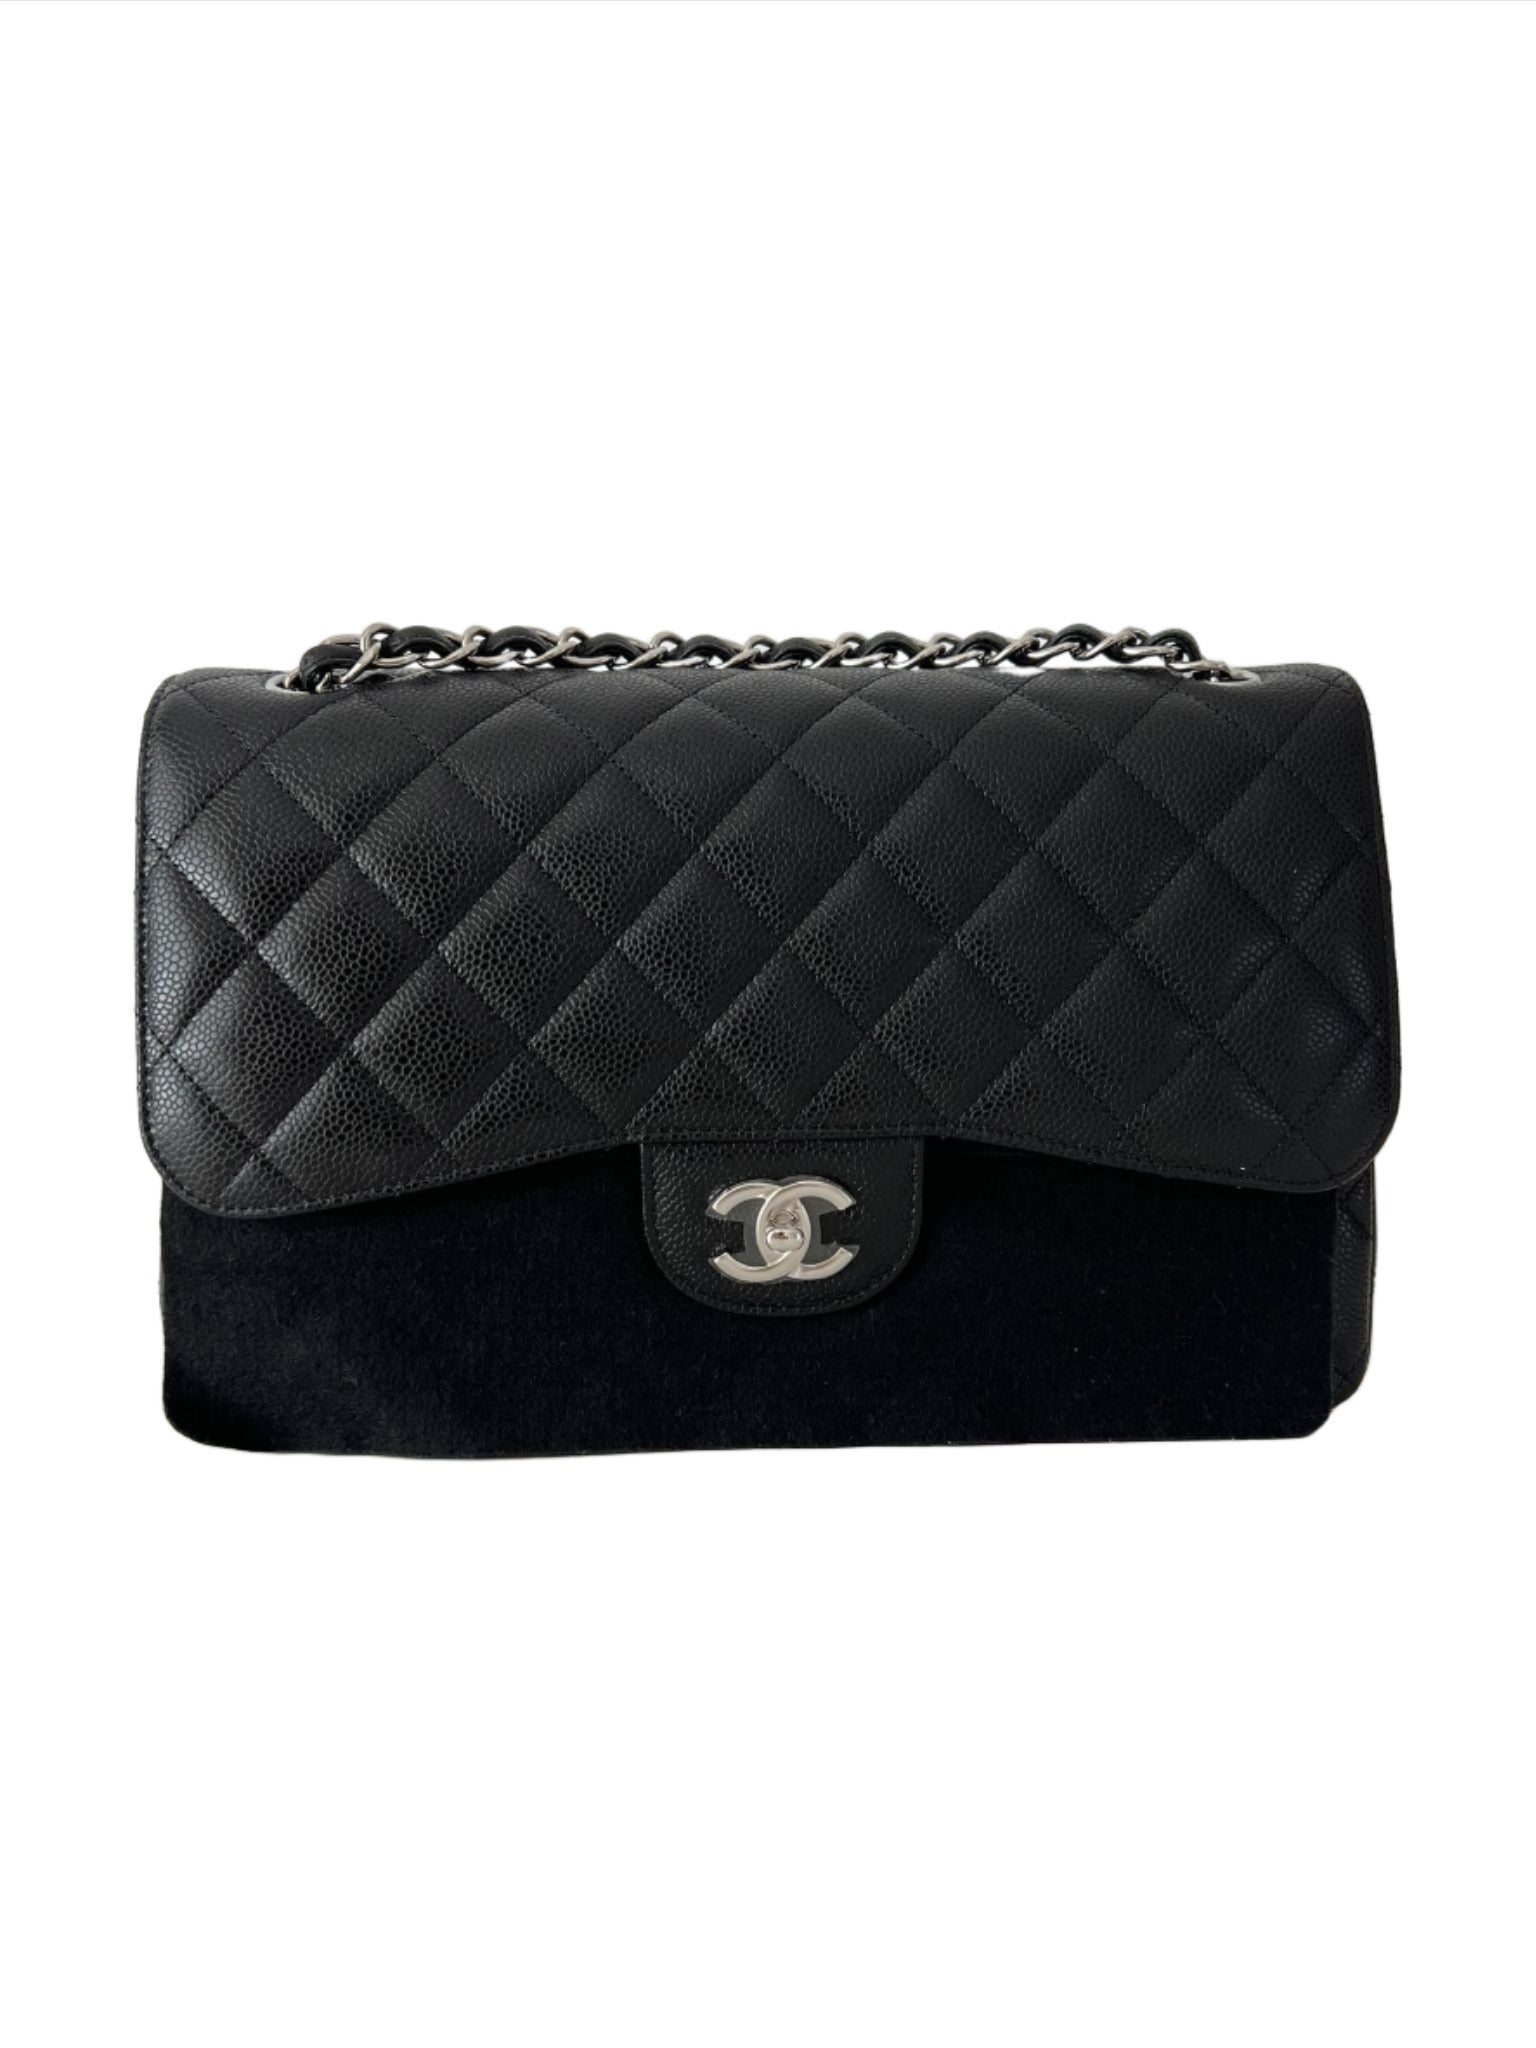 Black Caviar Quilted Jumbo Double Flap Bag W/SHW